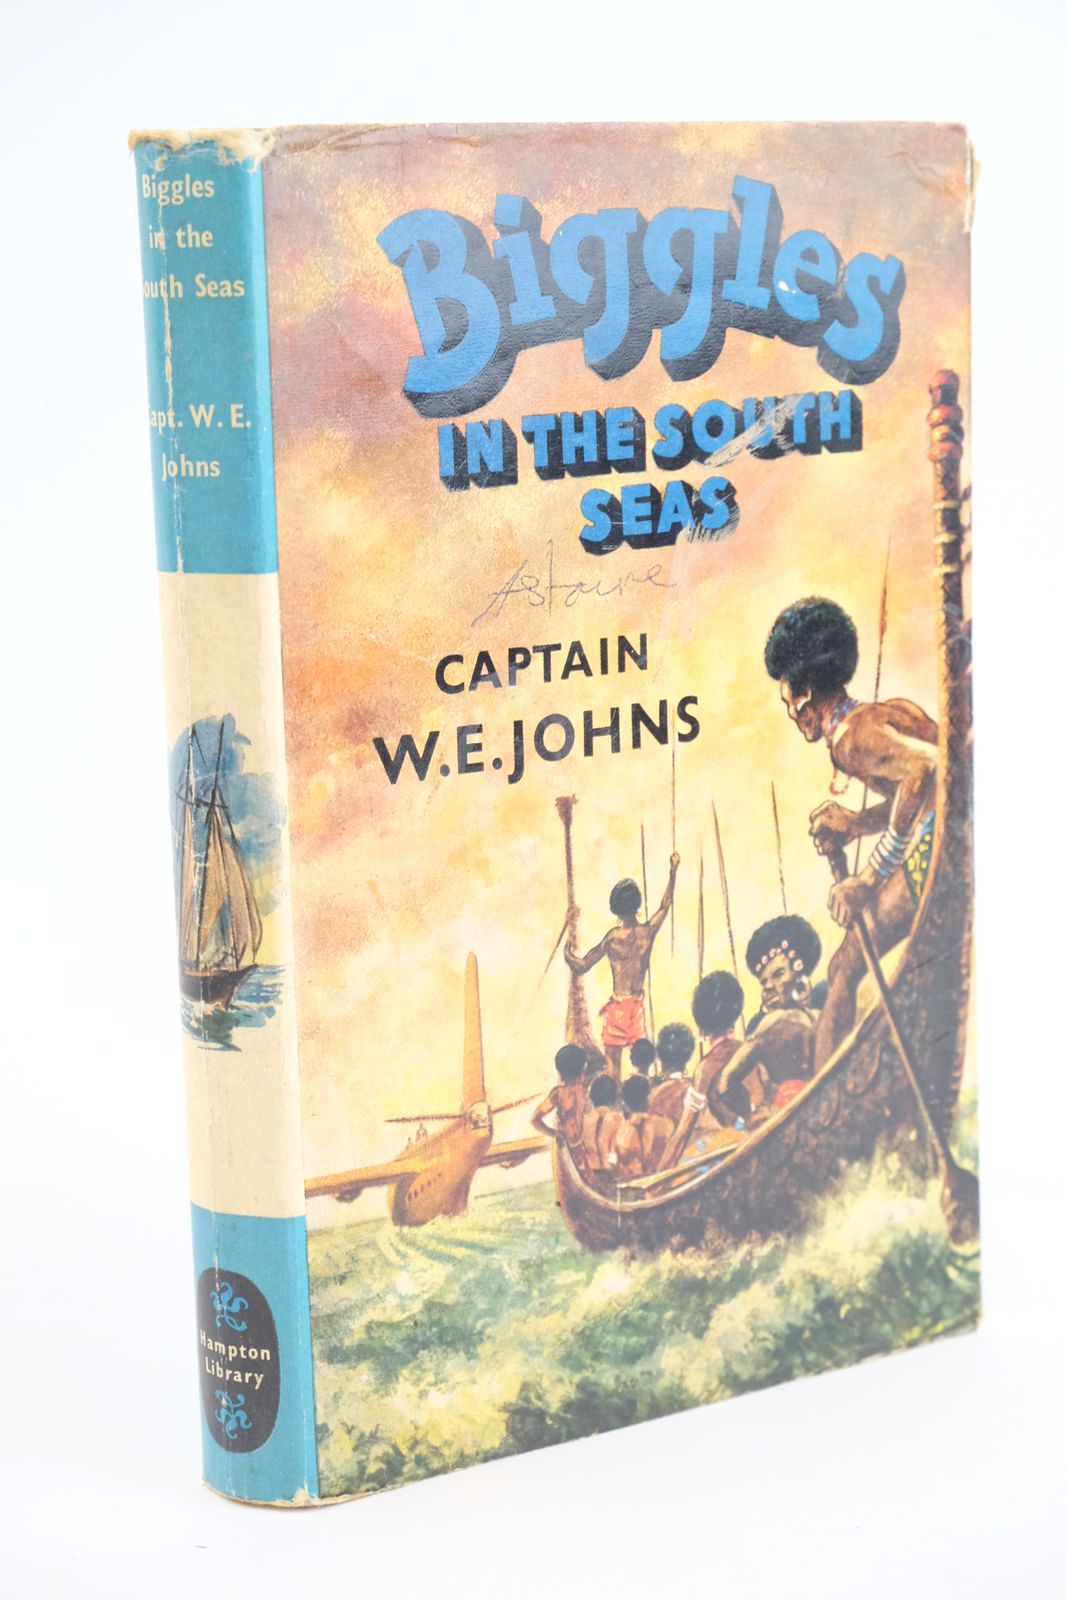 Photo of BIGGLES IN THE SOUTH SEAS written by Johns, W.E. published by Brockhampton Press (STOCK CODE: 1323881)  for sale by Stella & Rose's Books